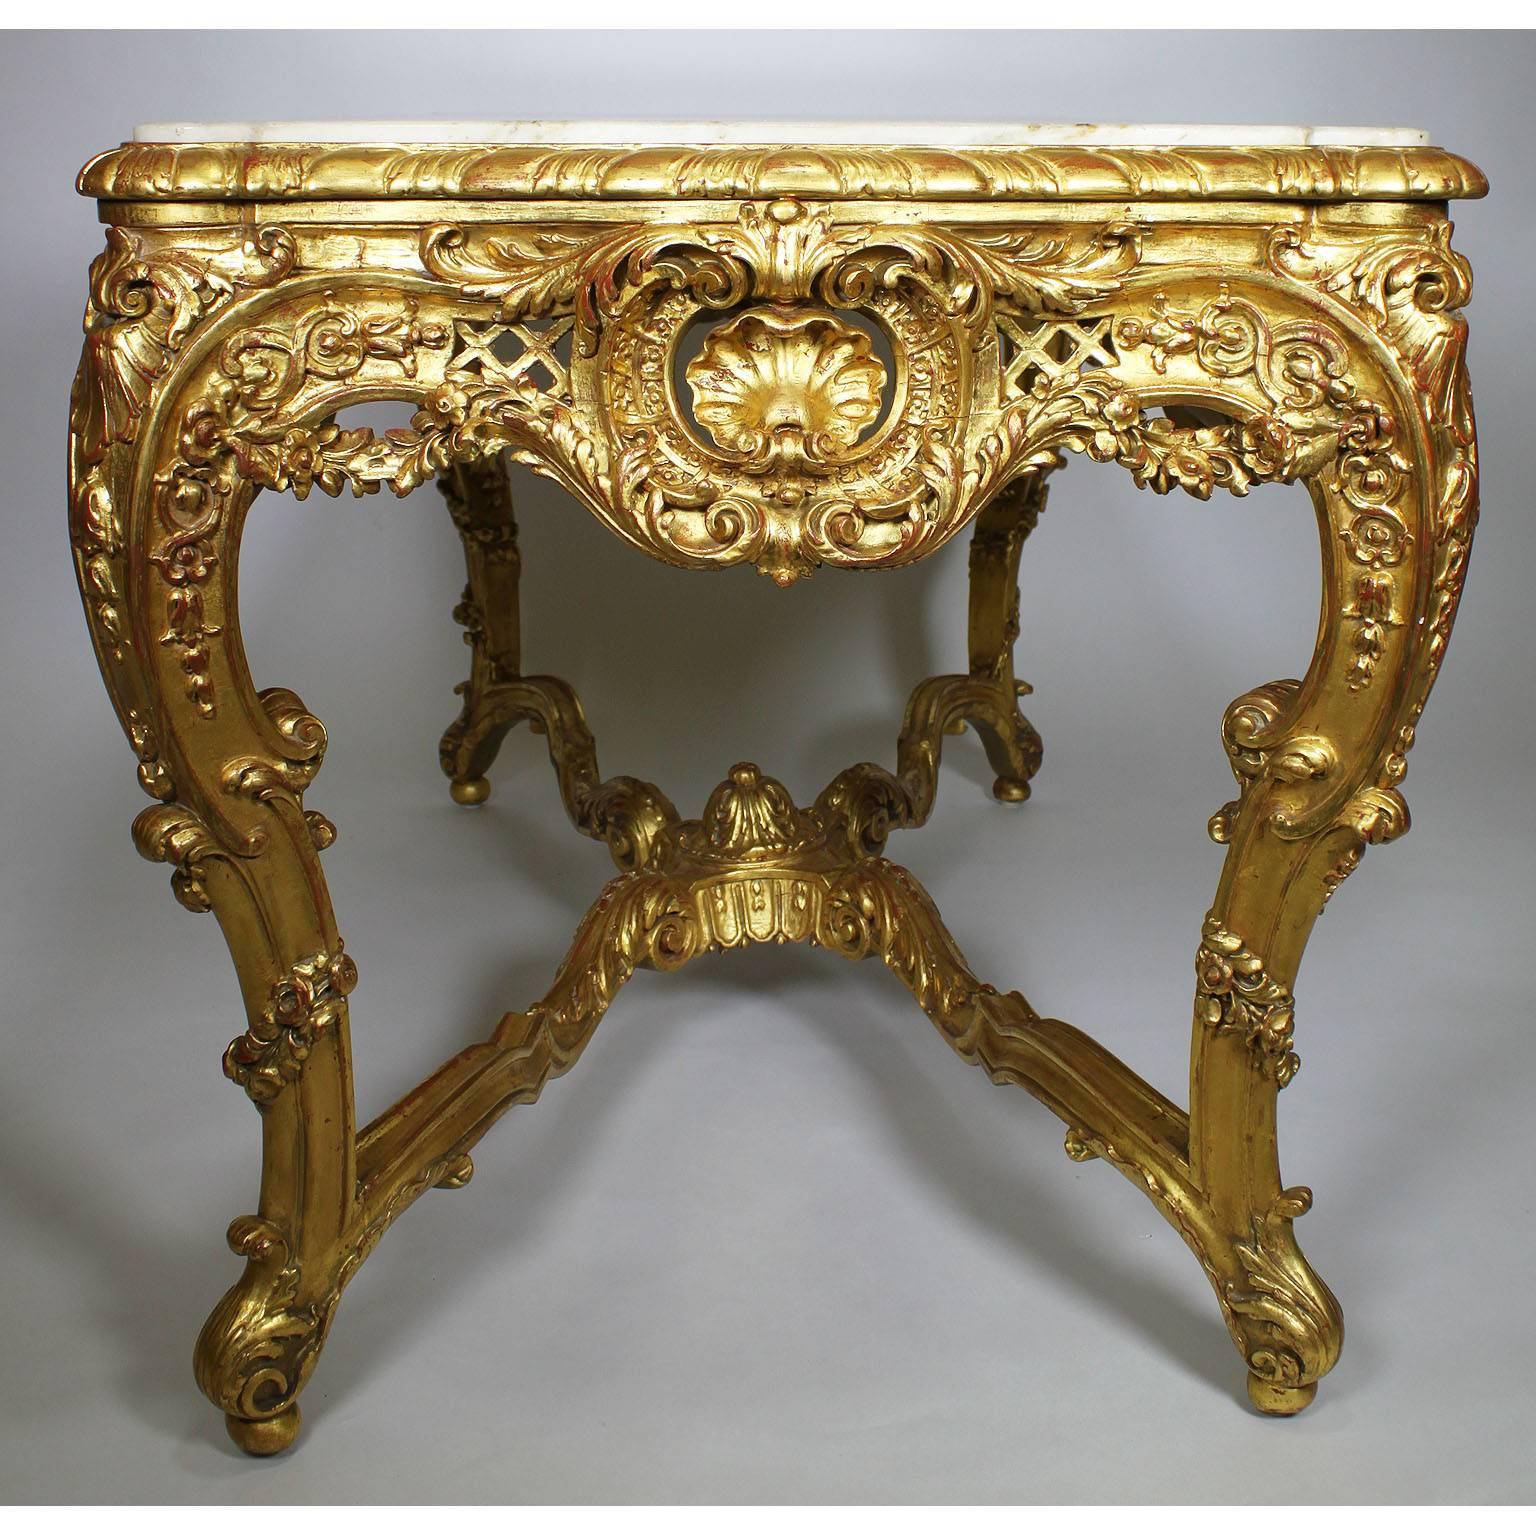 Marble French Belle Époque 19th-20th Century Giltwood Carved Rococo Center Hall Table For Sale